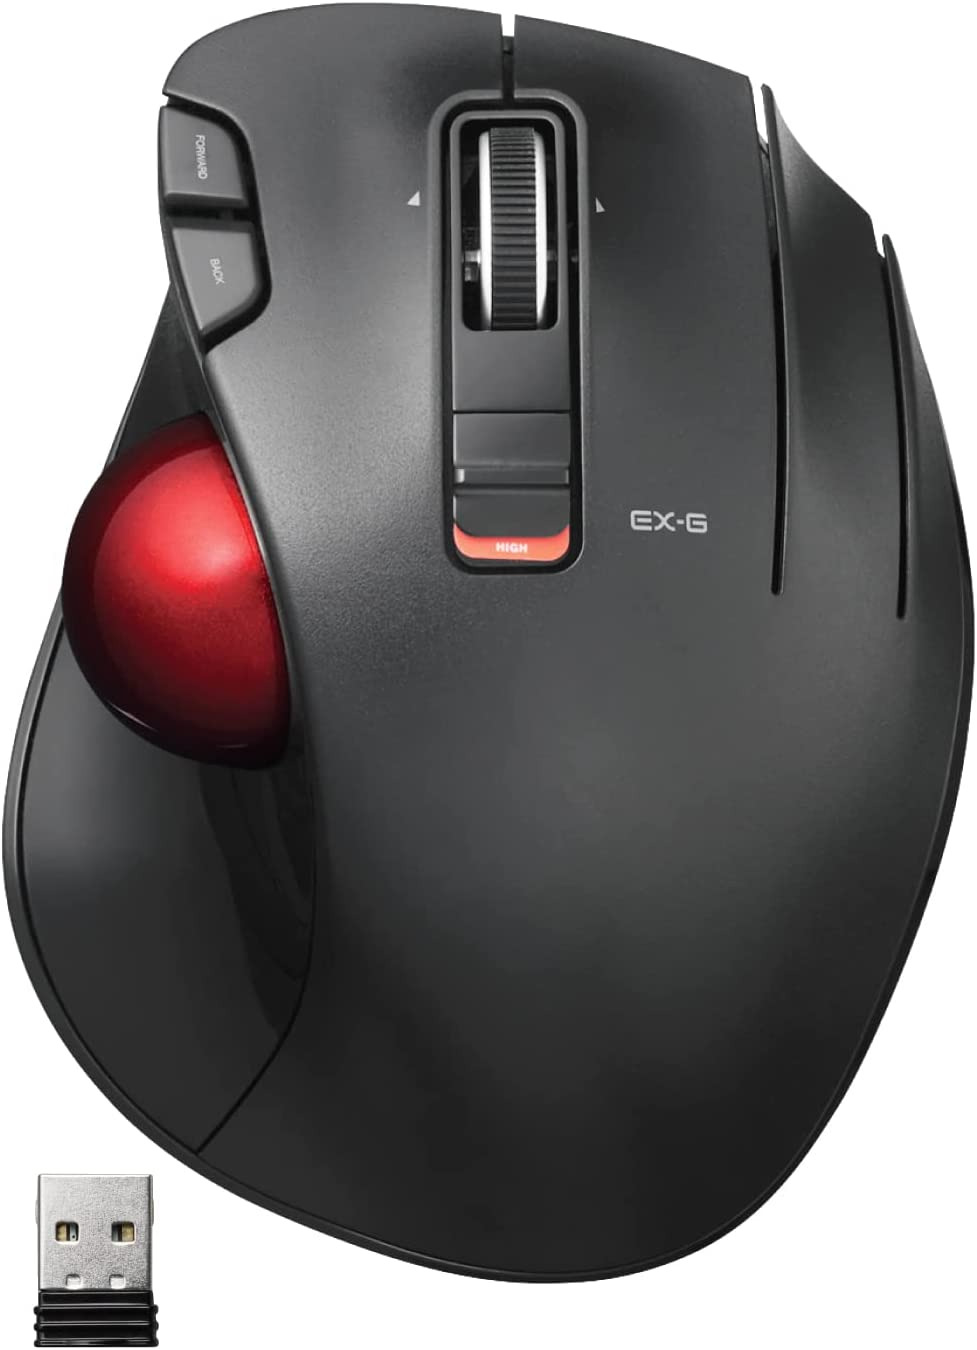 EX-G Trackball Mouse, 2.4Ghz Wireless, 6-Button Function with Smooth Tracking